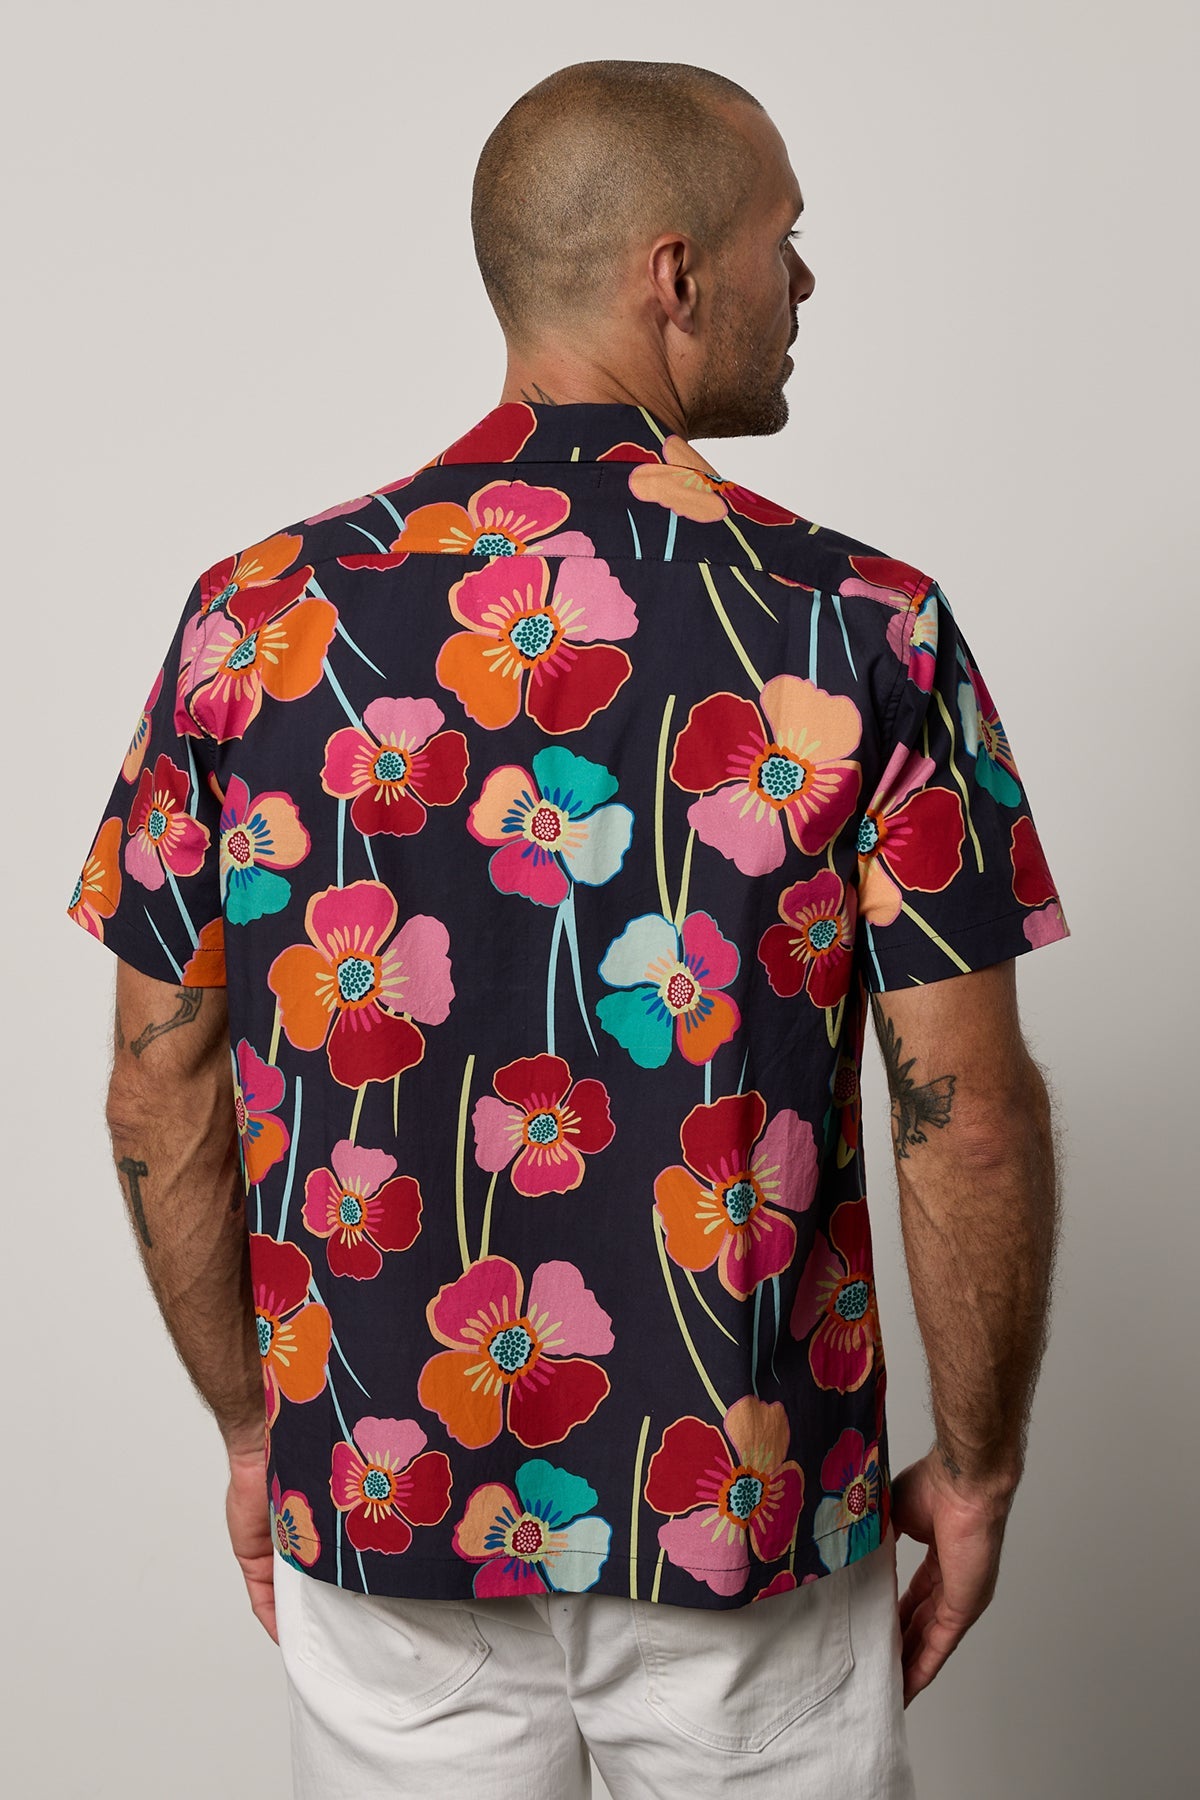   Iggy Button up shirt in Bahama print with large bold modern flower print on dark background with white denim back 